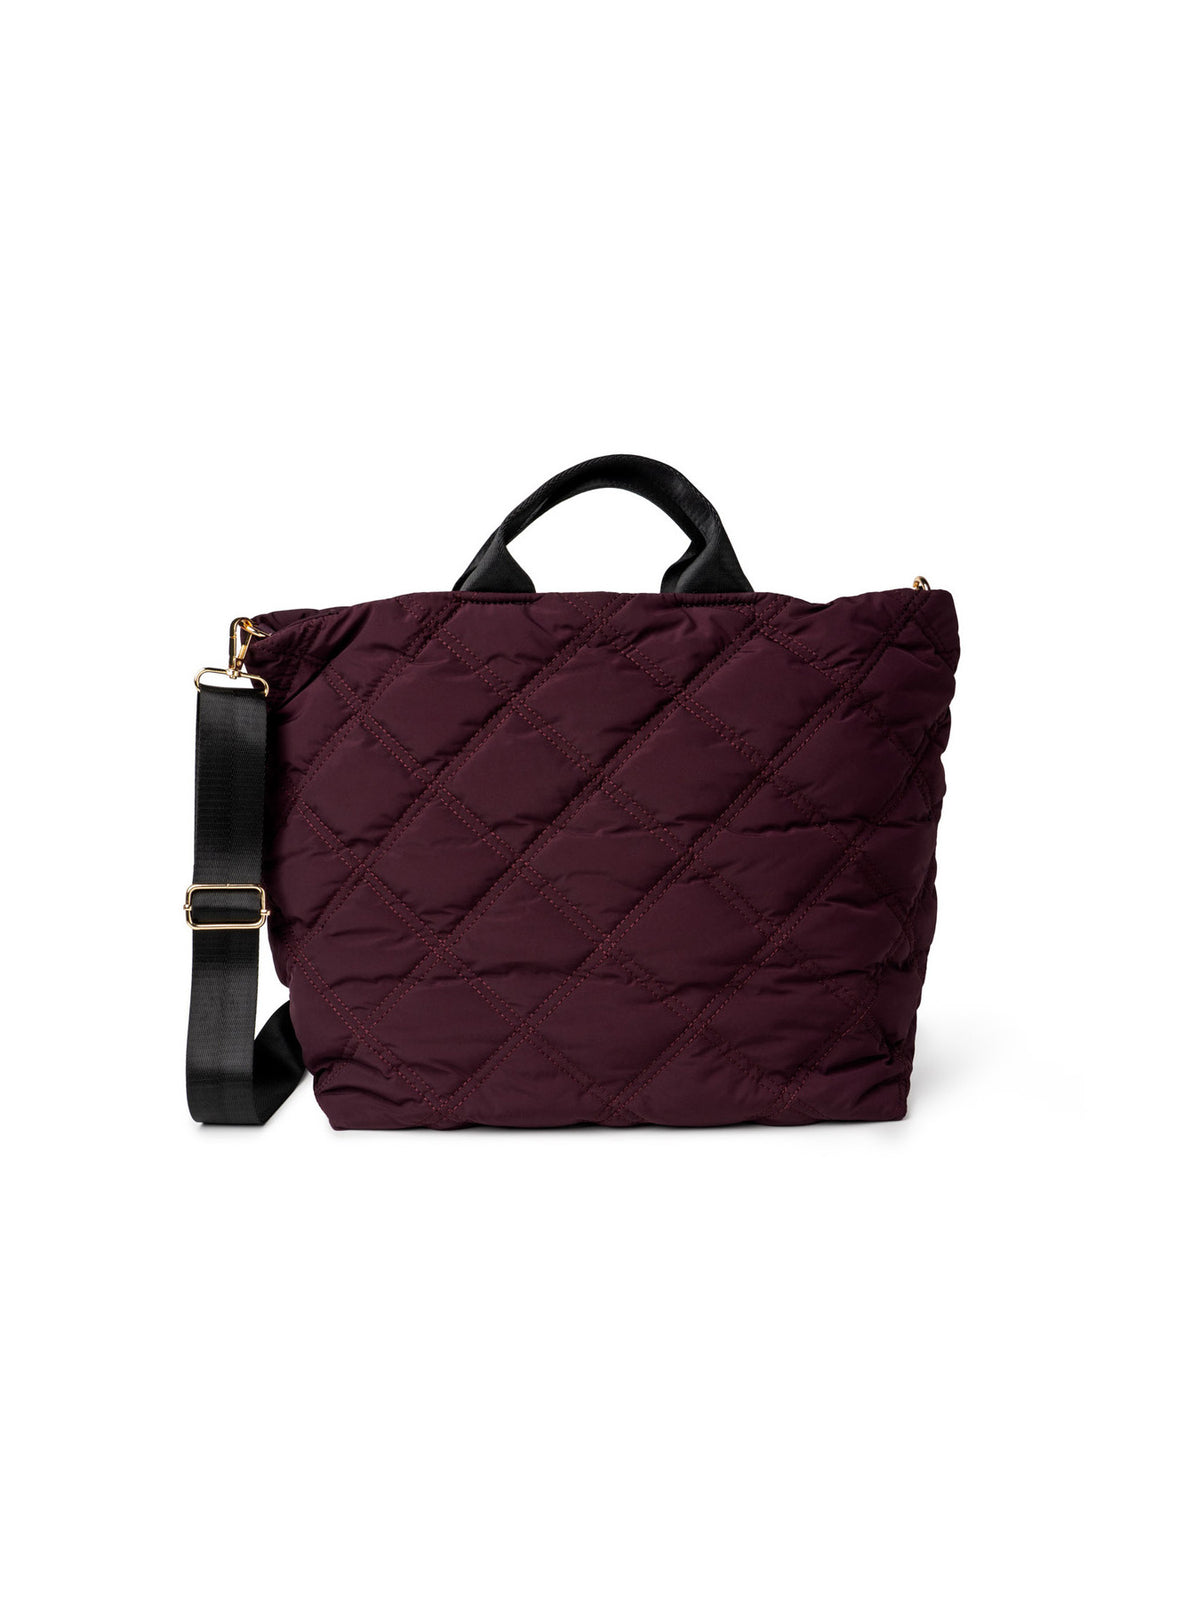 kedzie cloud 9 quilted tote bag in mulberry